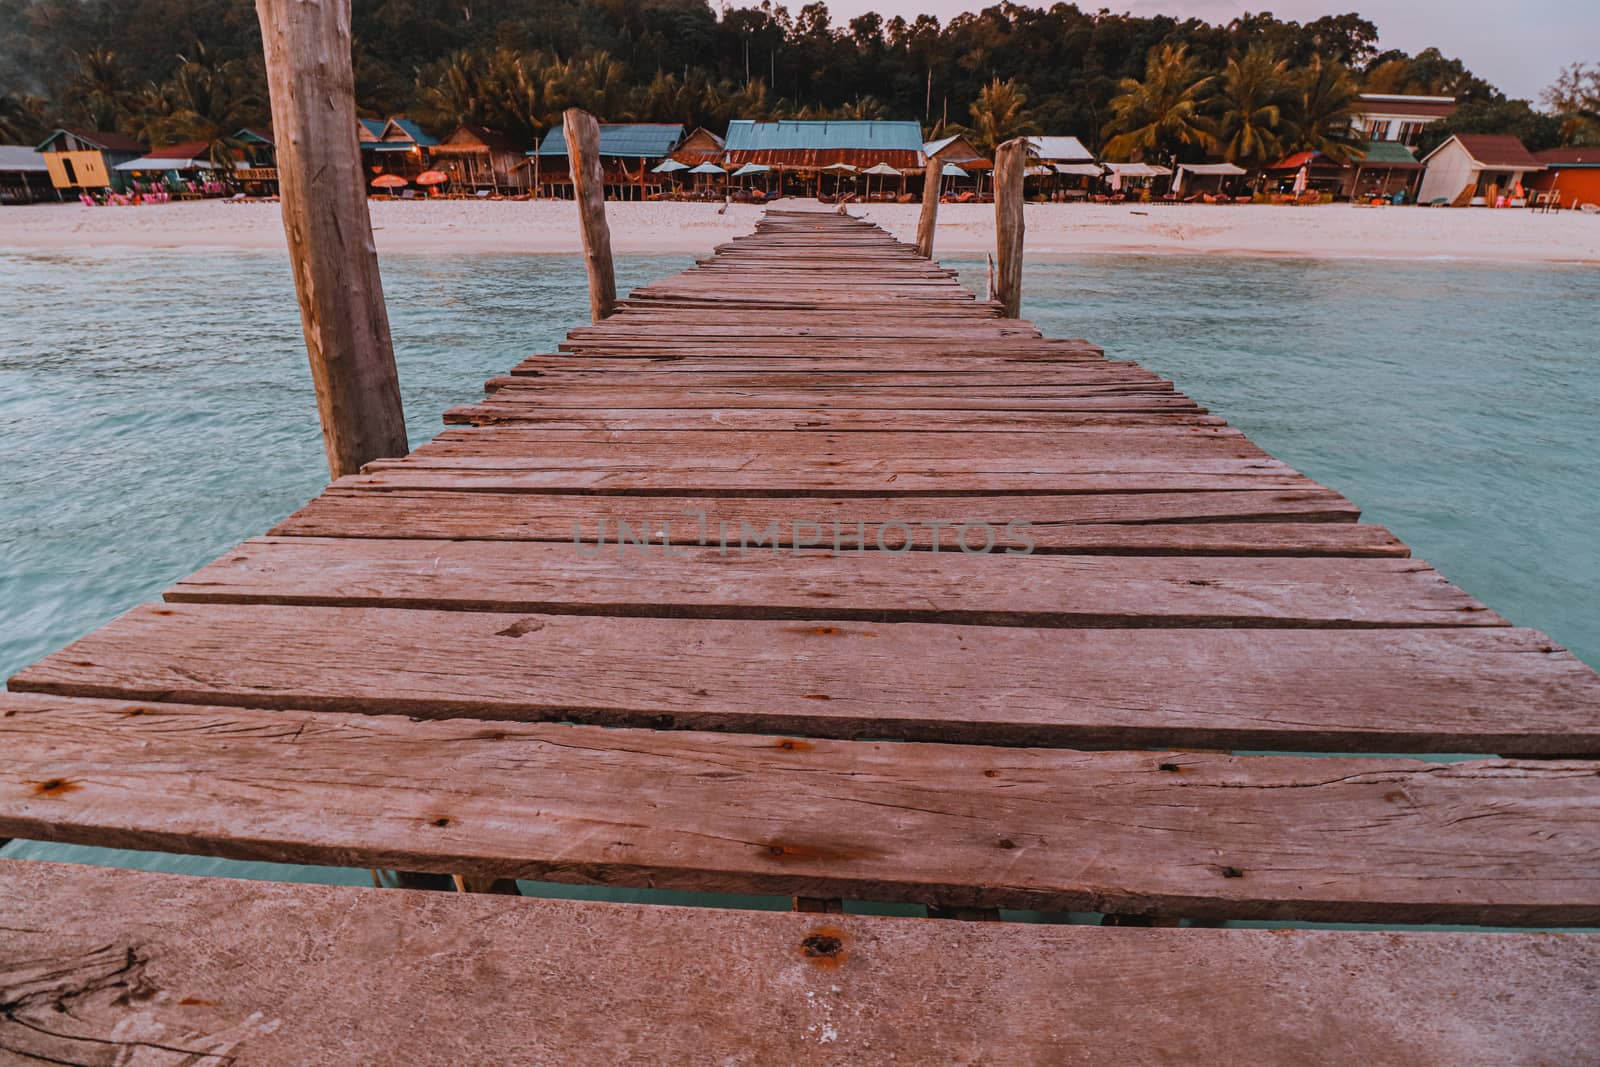 Wooden Pier leading to an Island by Sonnet15